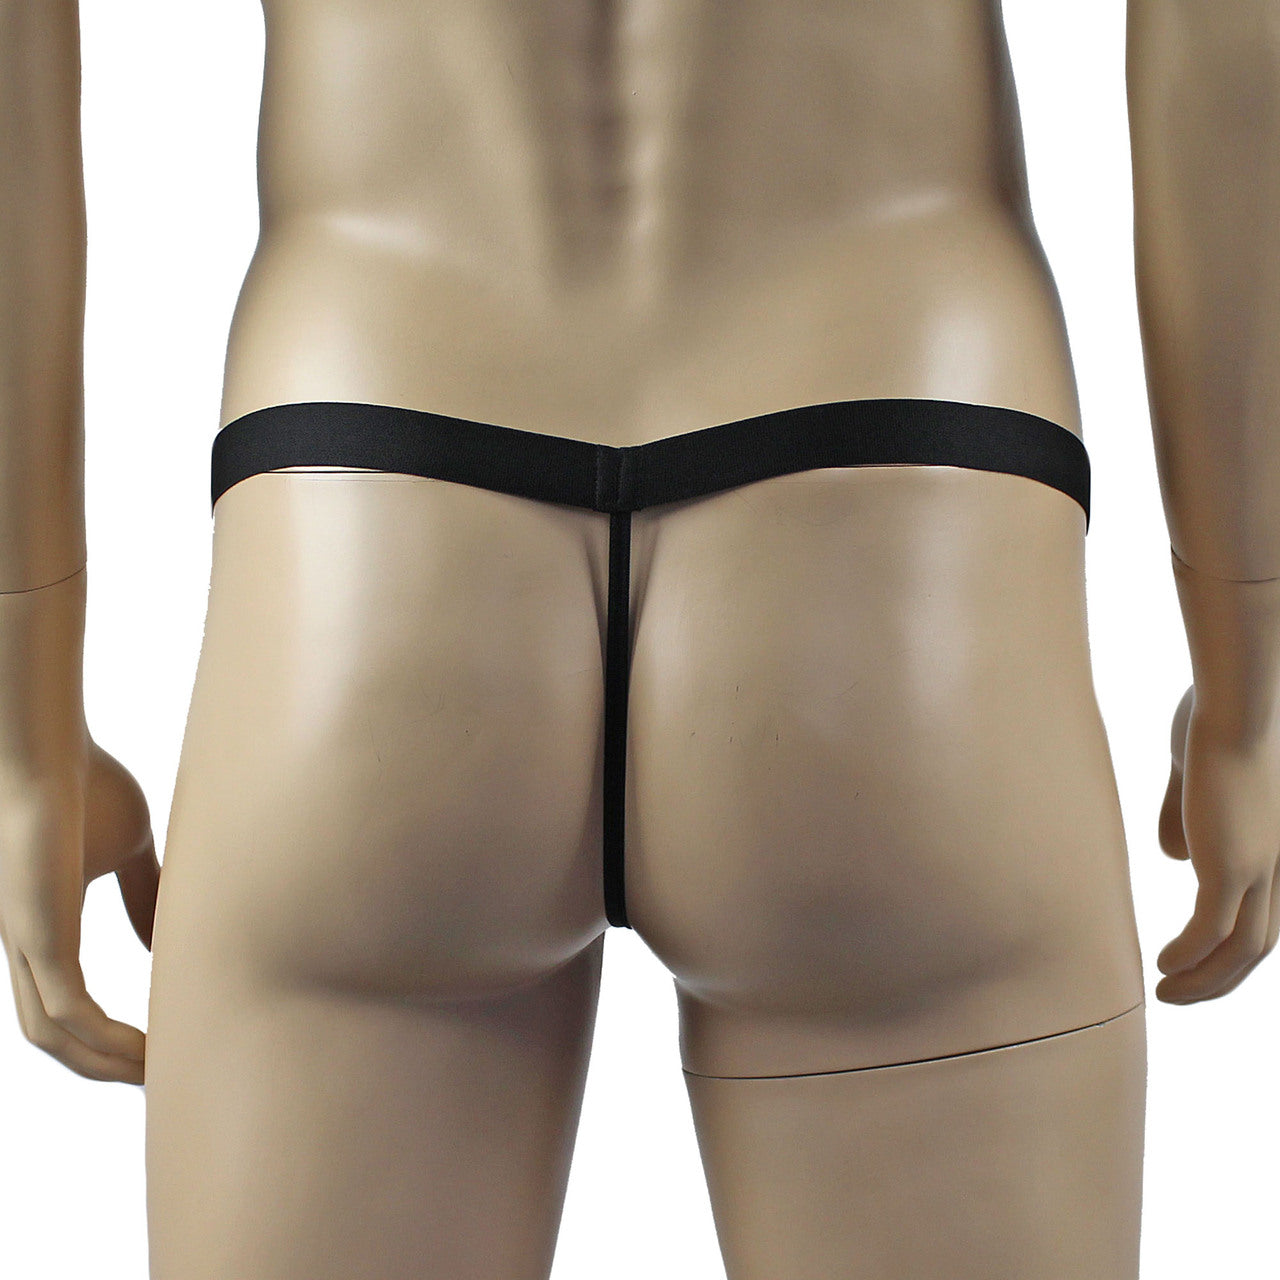 Mens Willie G string Thong with Penis Print Black and White